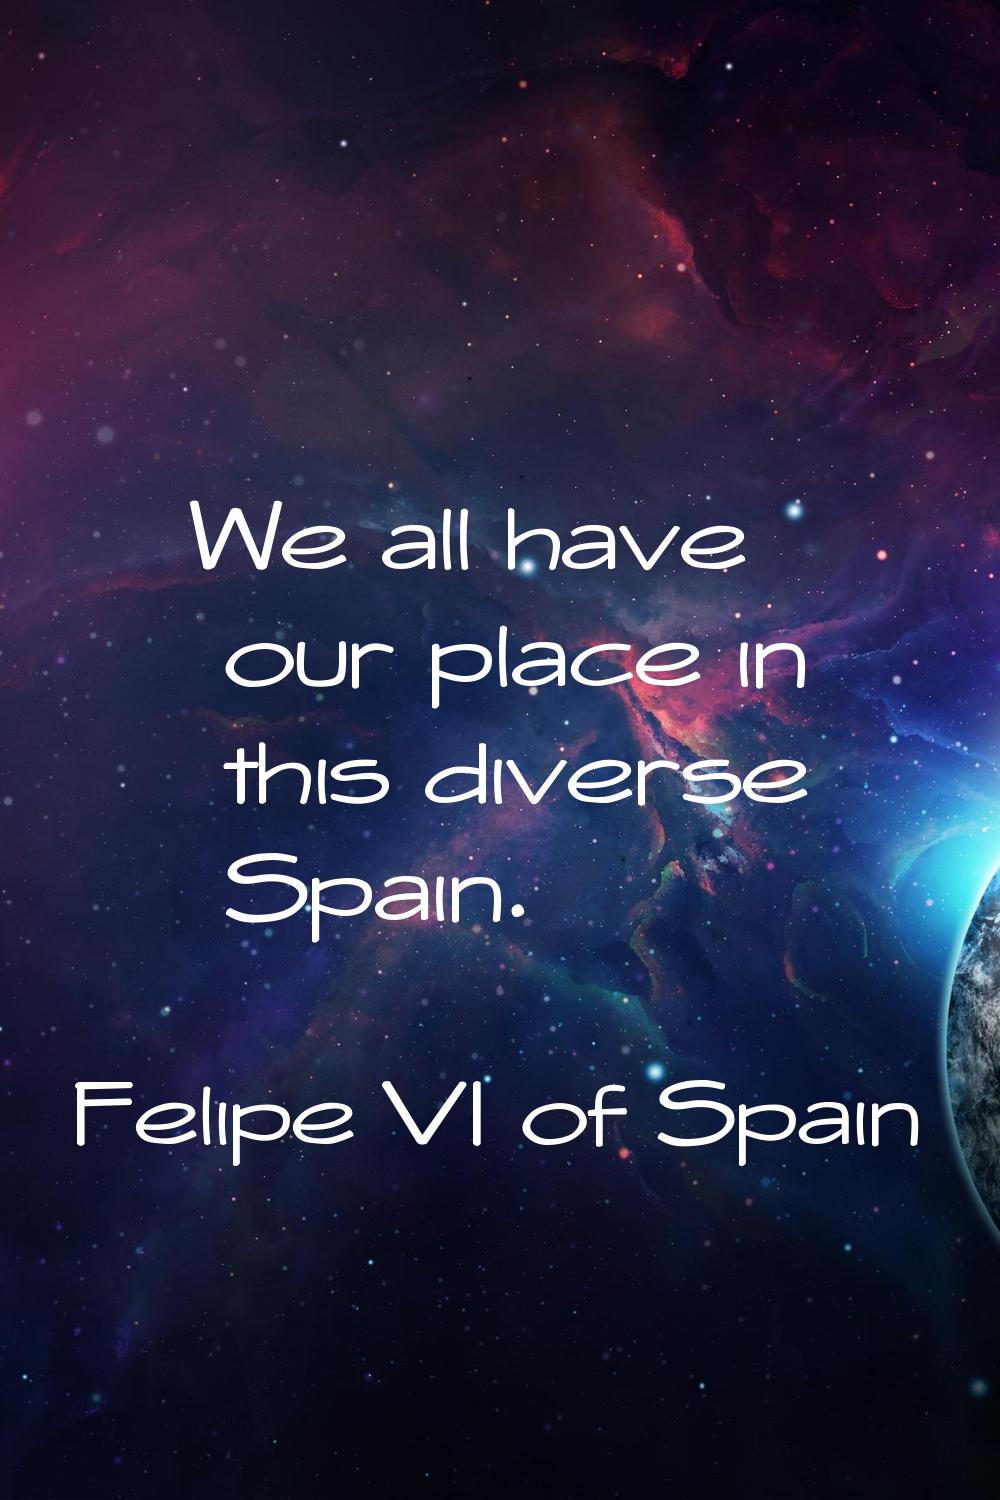 We all have our place in this diverse Spain.